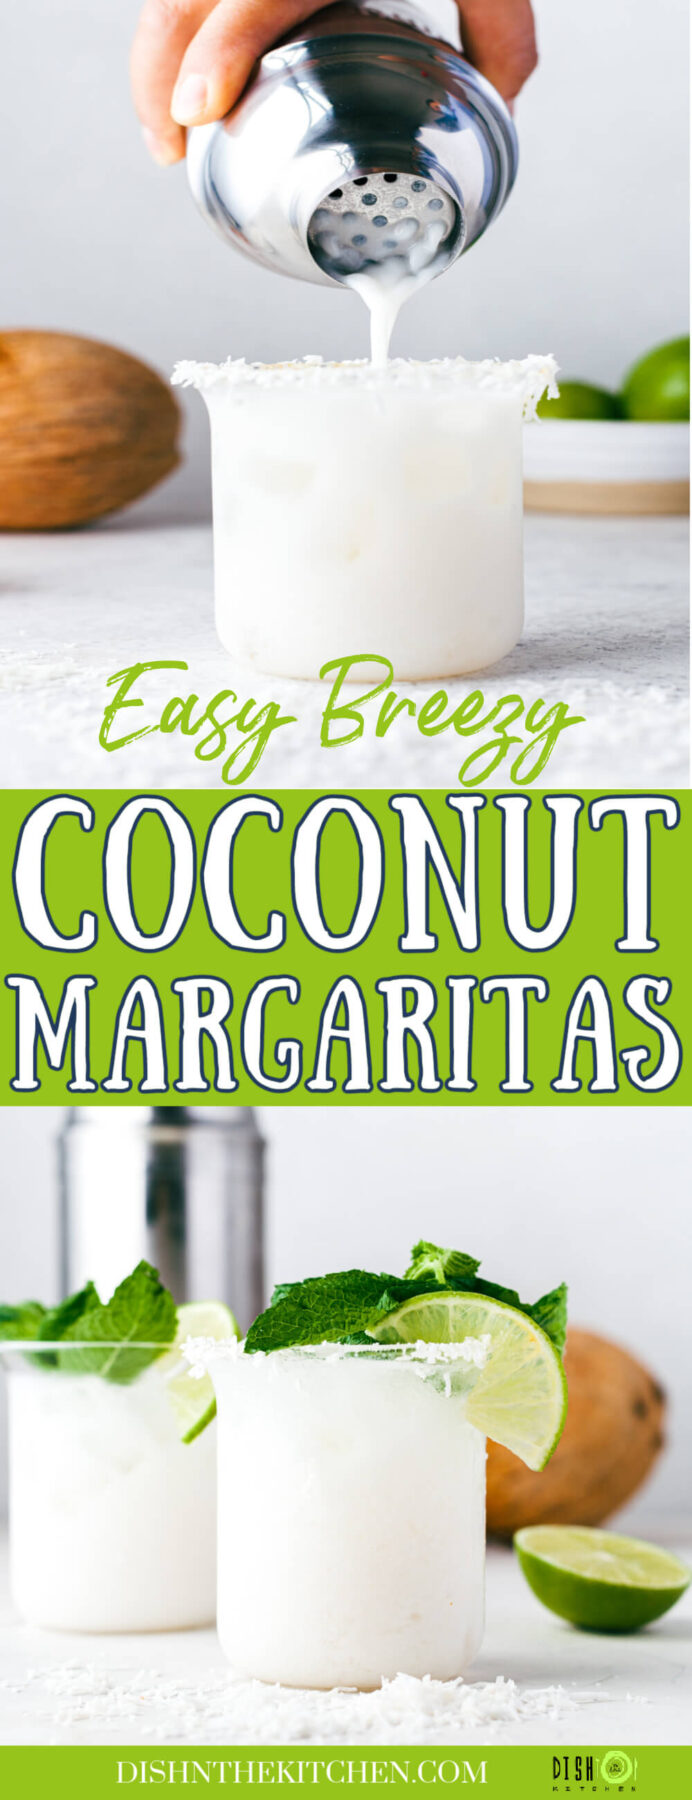 Pinterest image featuring two creamy coconut margaritas in rocks glasses rimmed with coconut and garnished with fresh mint and lime wedges.